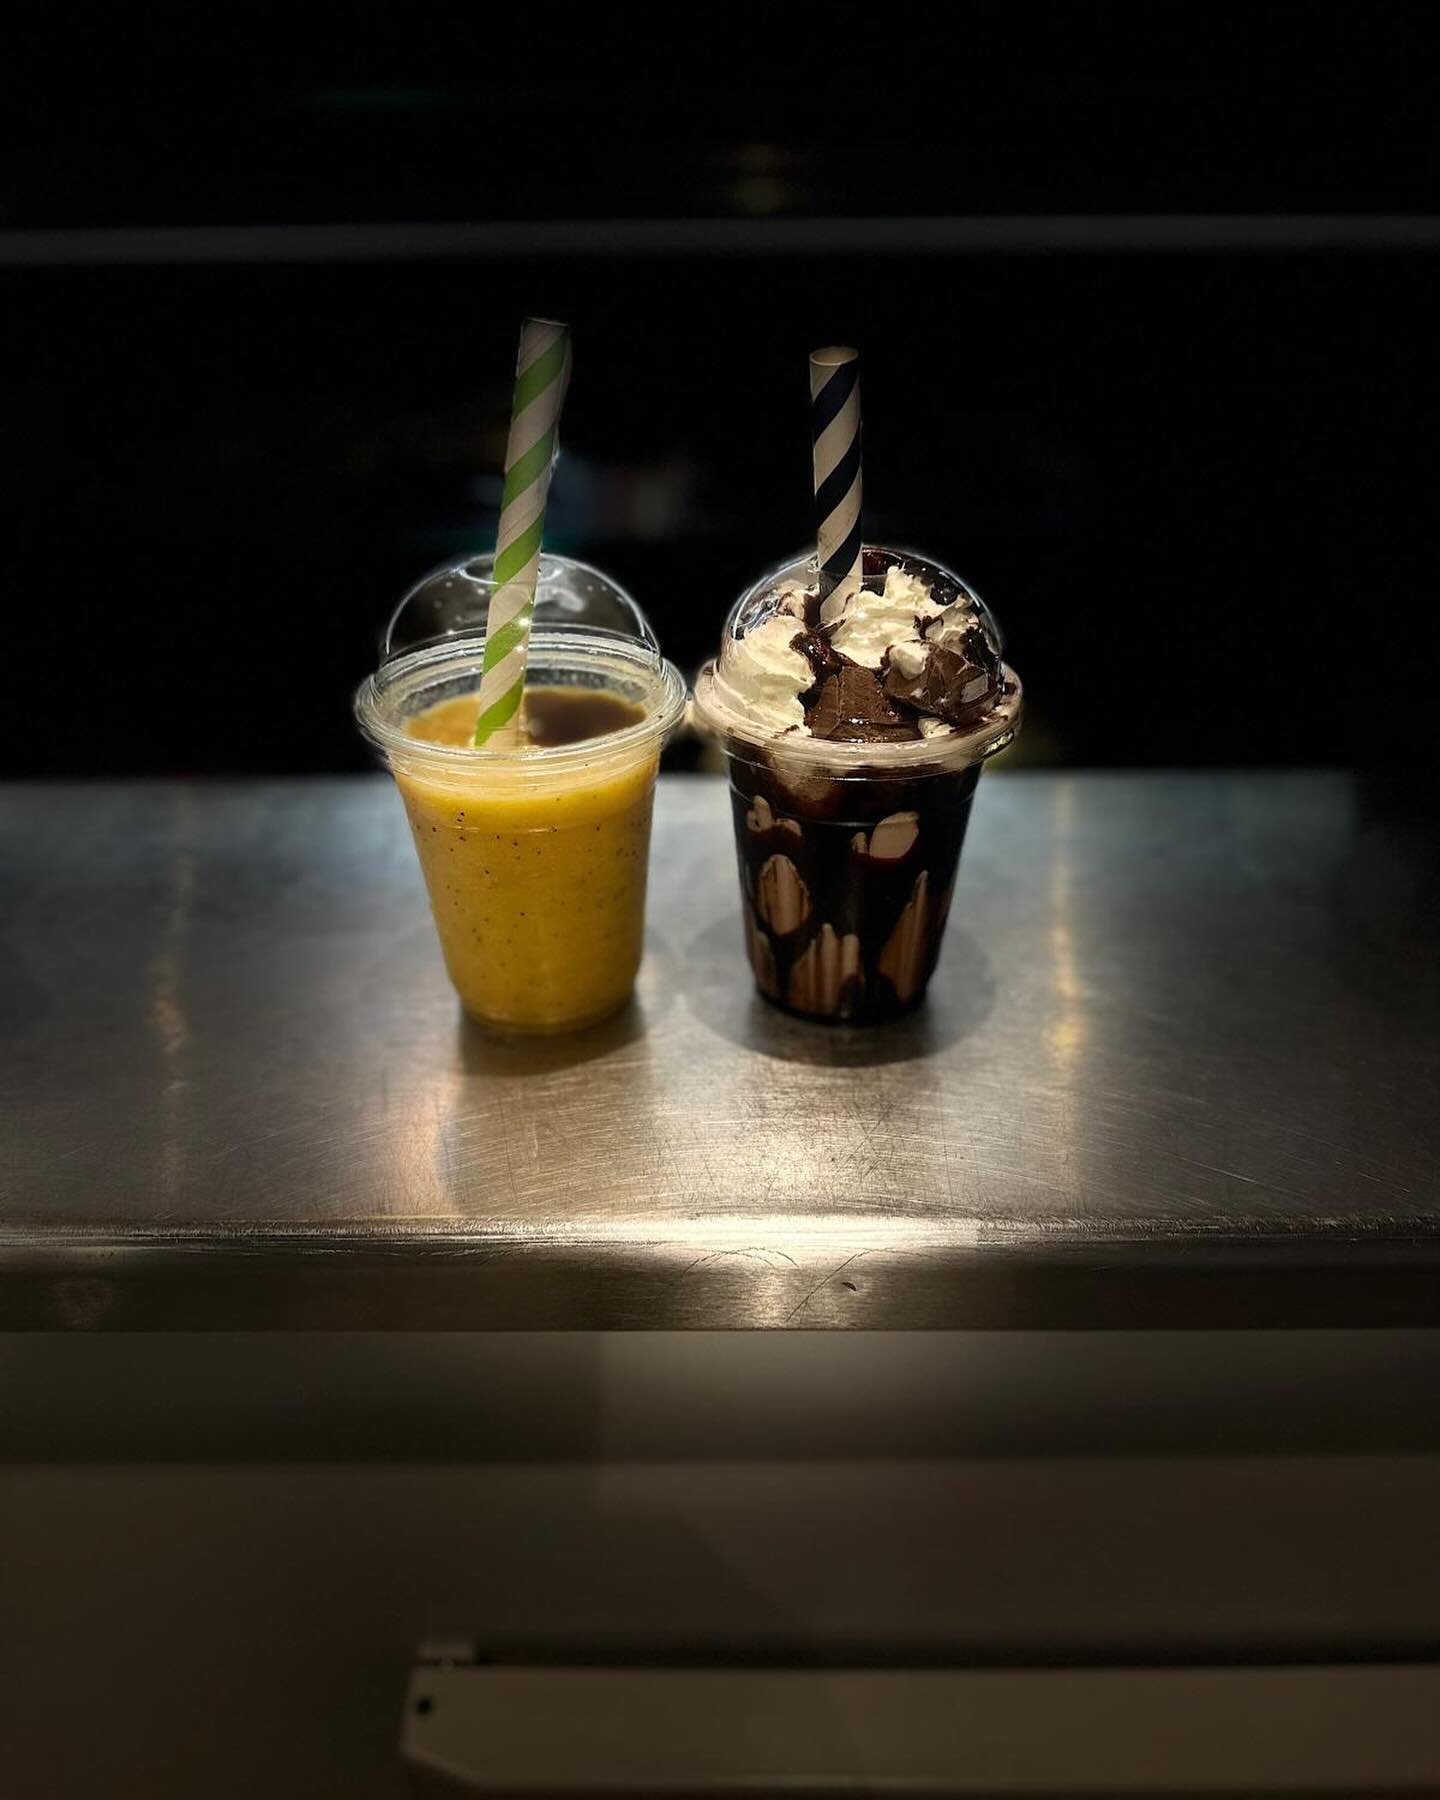 Summer is here which can now only mean one thing !!! Now offering you a range of real Icecream milkshakes, smoothies and protein shakes and of course scooped Brymour ice cream !!! Come and grab yours from our sandwich bar counter today !! 🍦🍓🍇🍑👊?